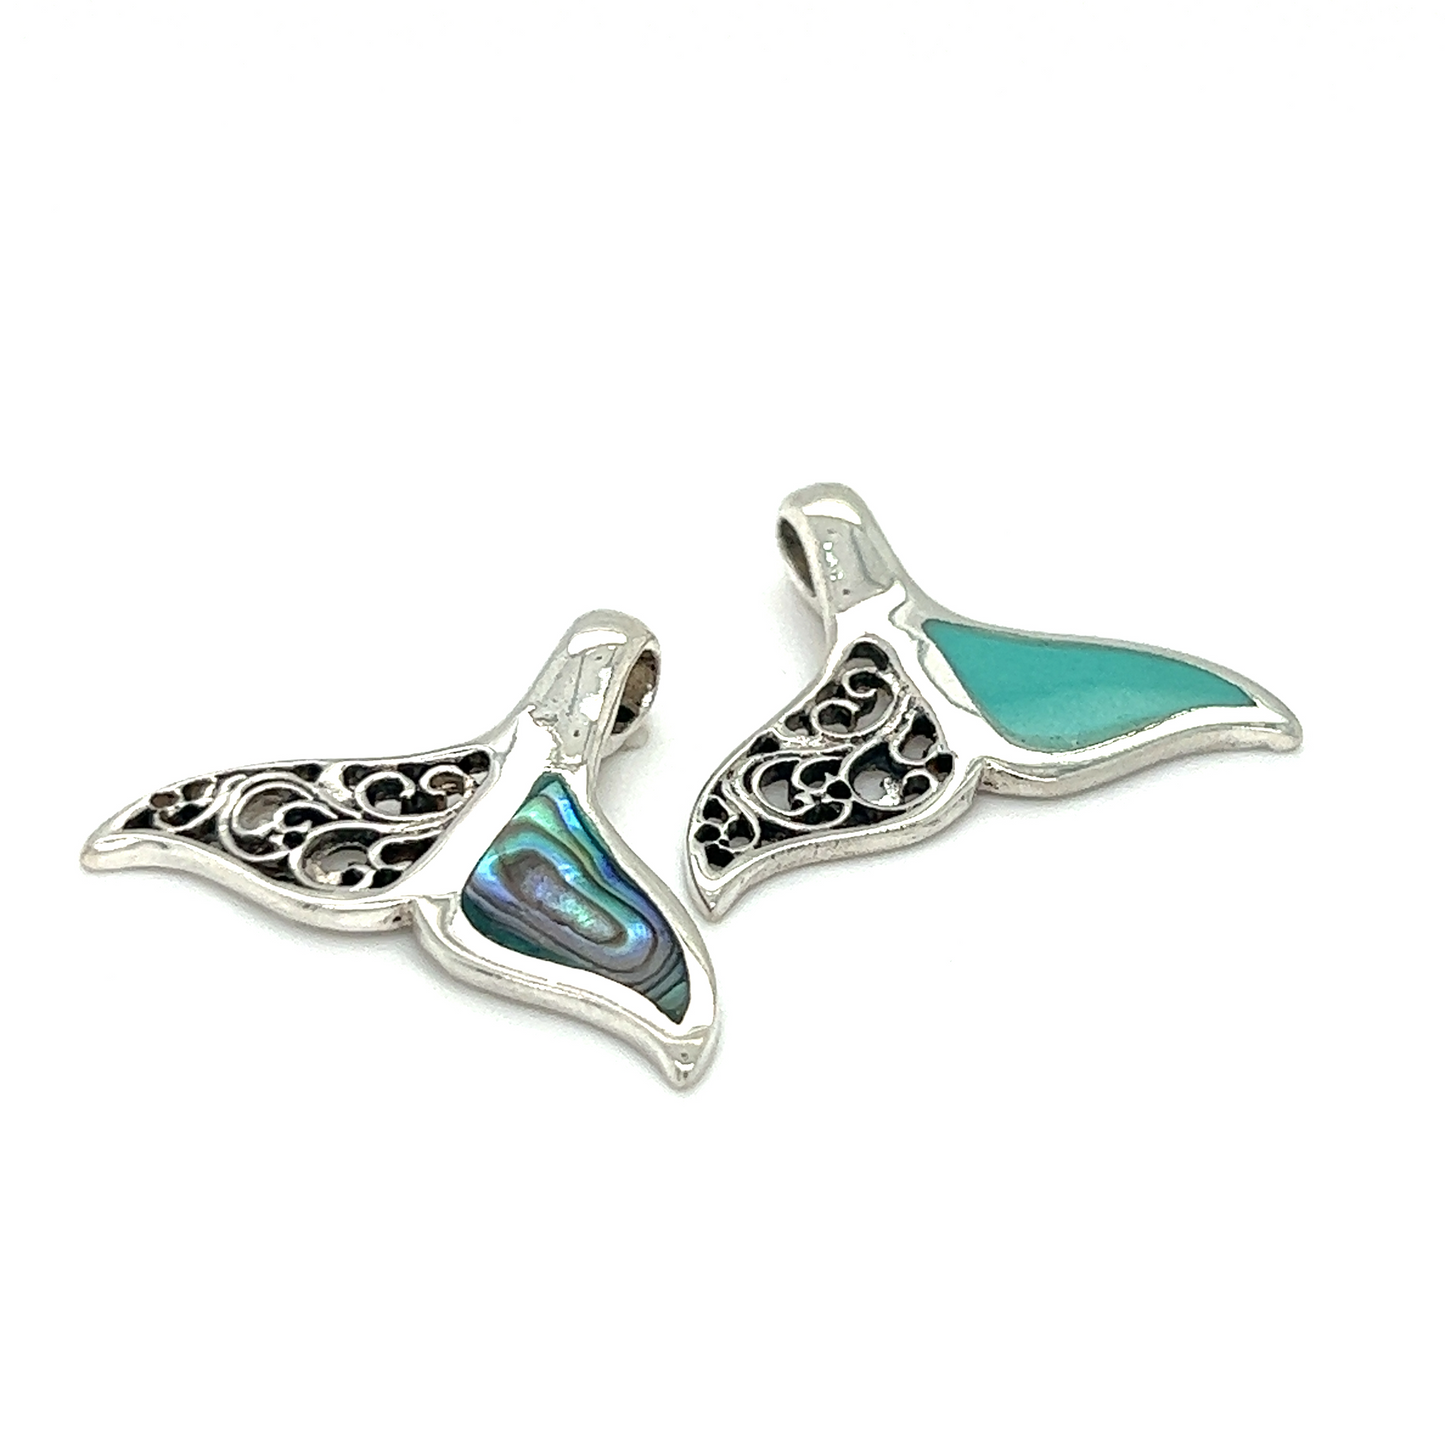 A pair of Half Filigree Whale Tail Pendants perfect for ocean conservation enthusiasts and supporters of Oceana.